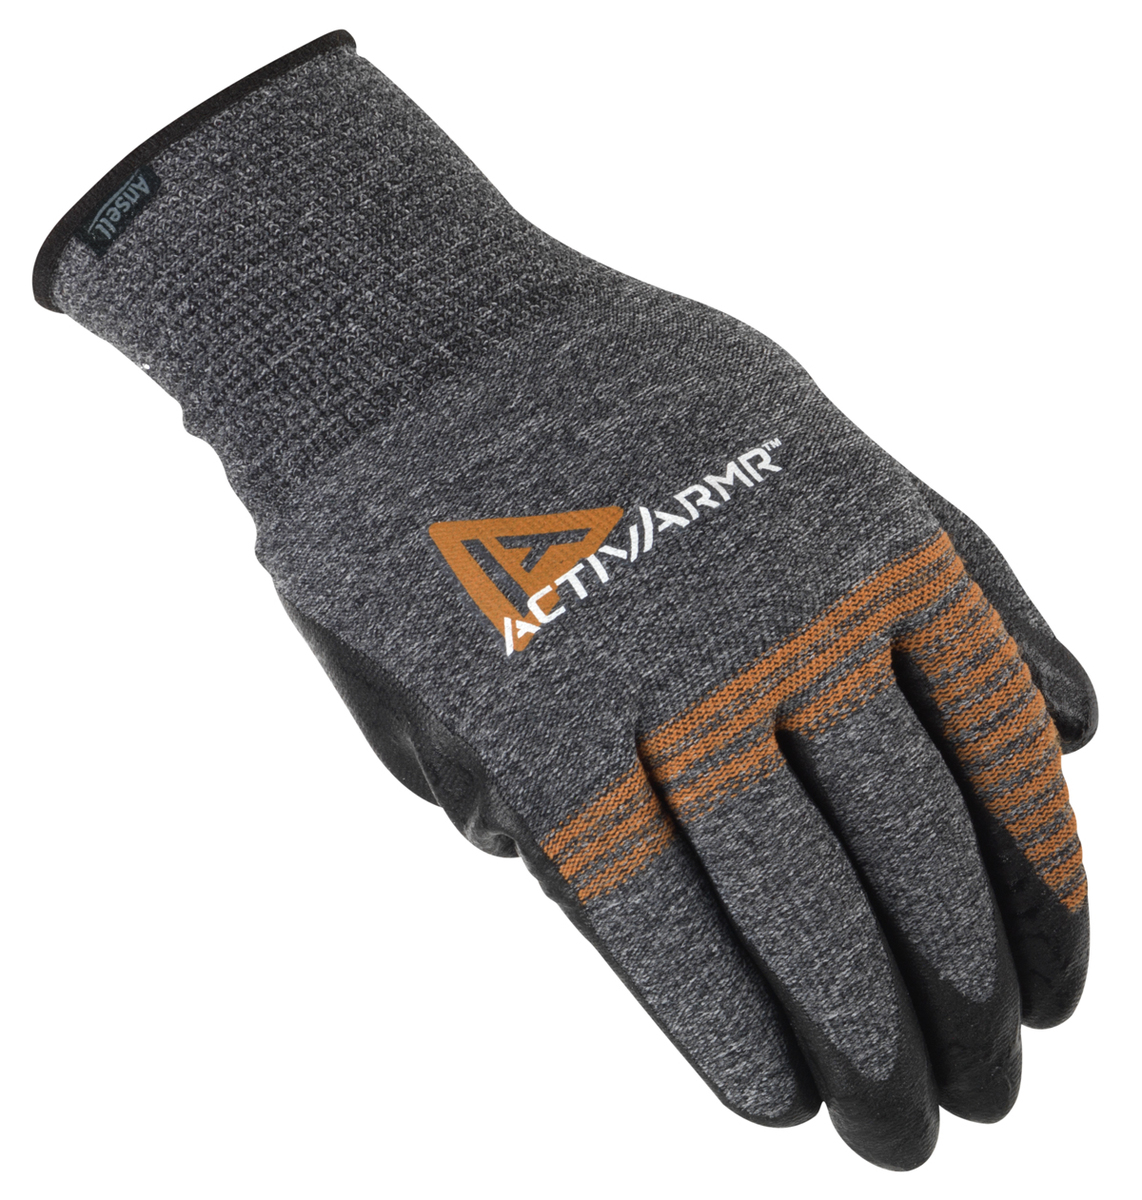 Ansell Size 10 ActivArmr® 15 Gauge And Light Weight Foam Nitrile Work Gloves With Black And Gray Nylon Liner And Knit Wrist